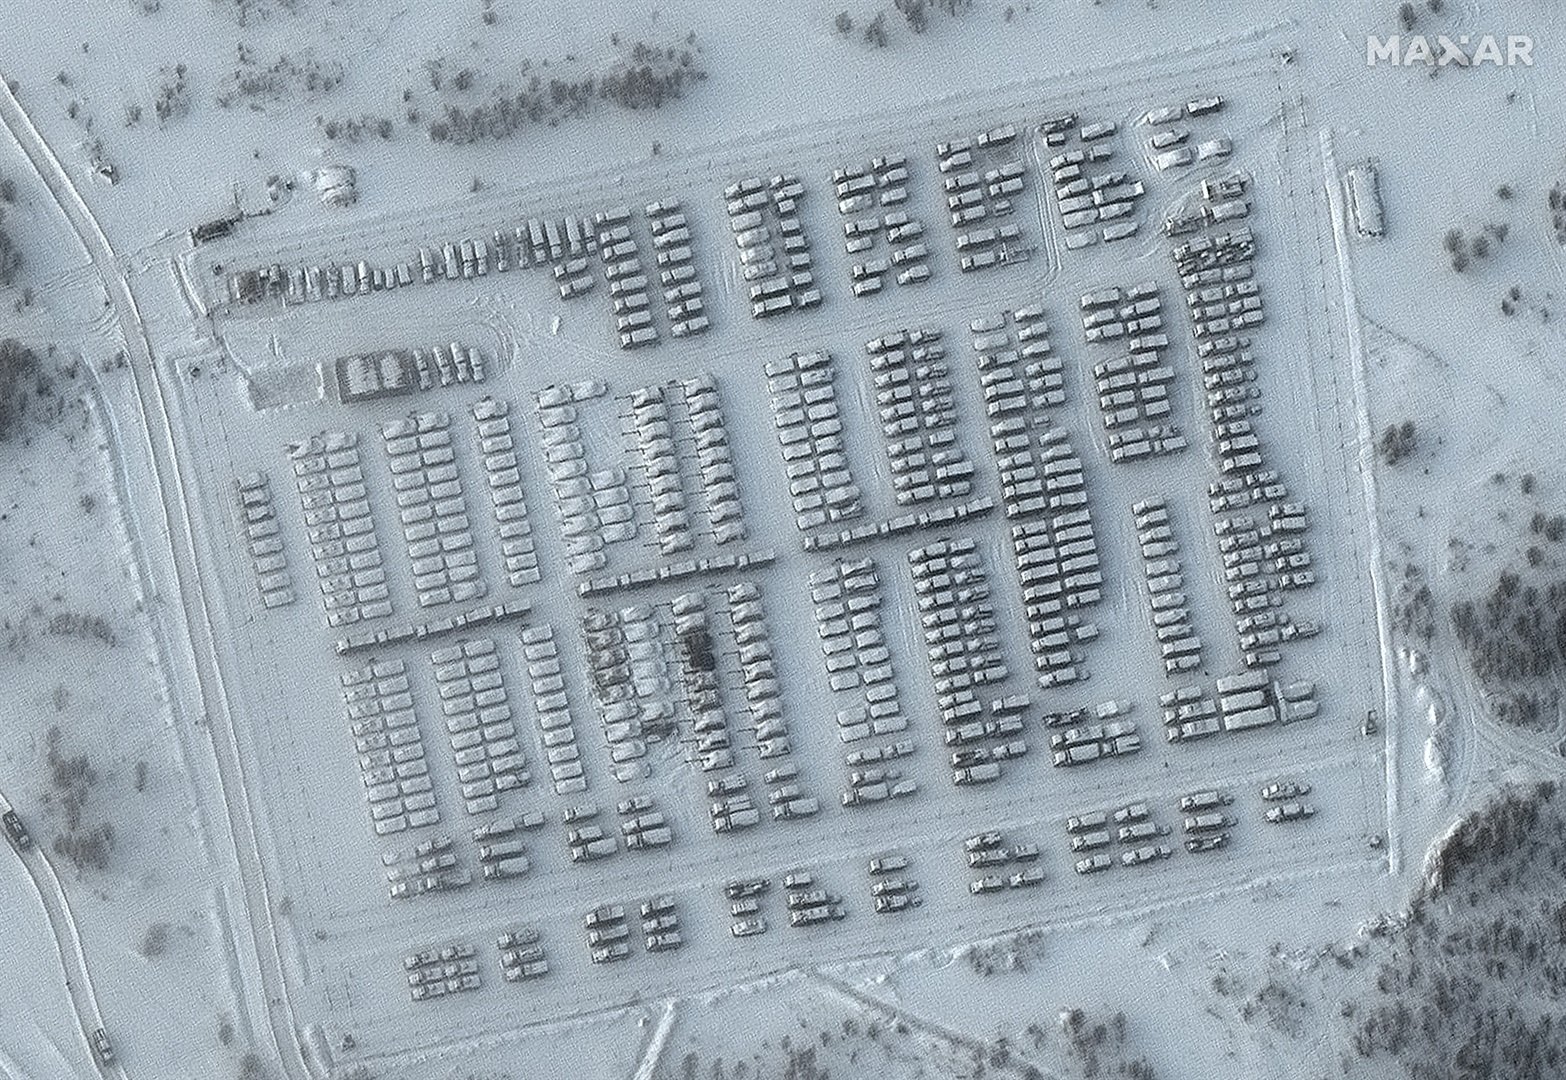 View of Russian battle groups in Yelnya, Russia on Jan. 19, 2022. Satellite image ©2022 Maxar Technologies